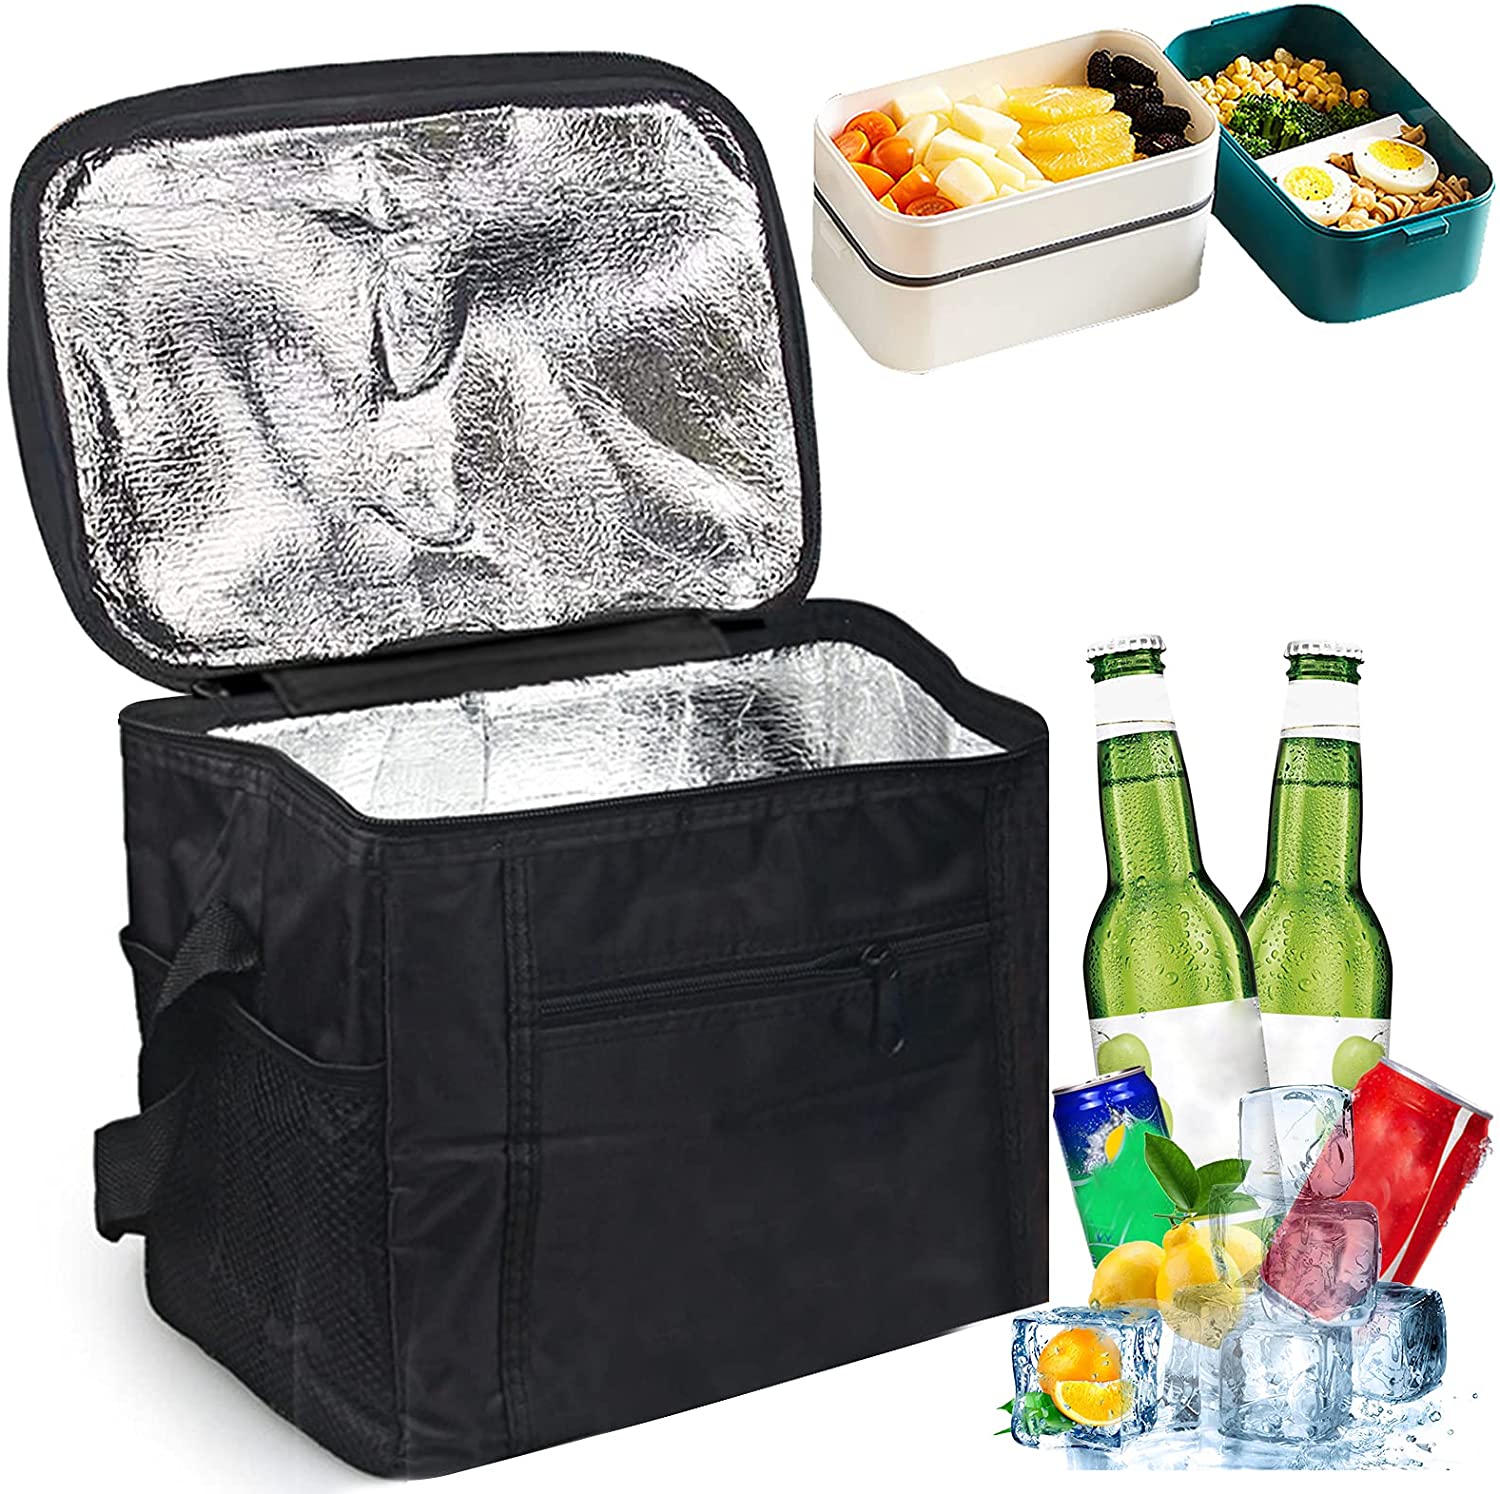 acdanc Foldable cooler bag, picnic bag, cooler bag, lunch bag, ice bag, ice bag, mini foldable cooler bag, mini cooler bags, small foldable thermal bag, insulated lunch bag, cooler for picnic - image 1 of 6